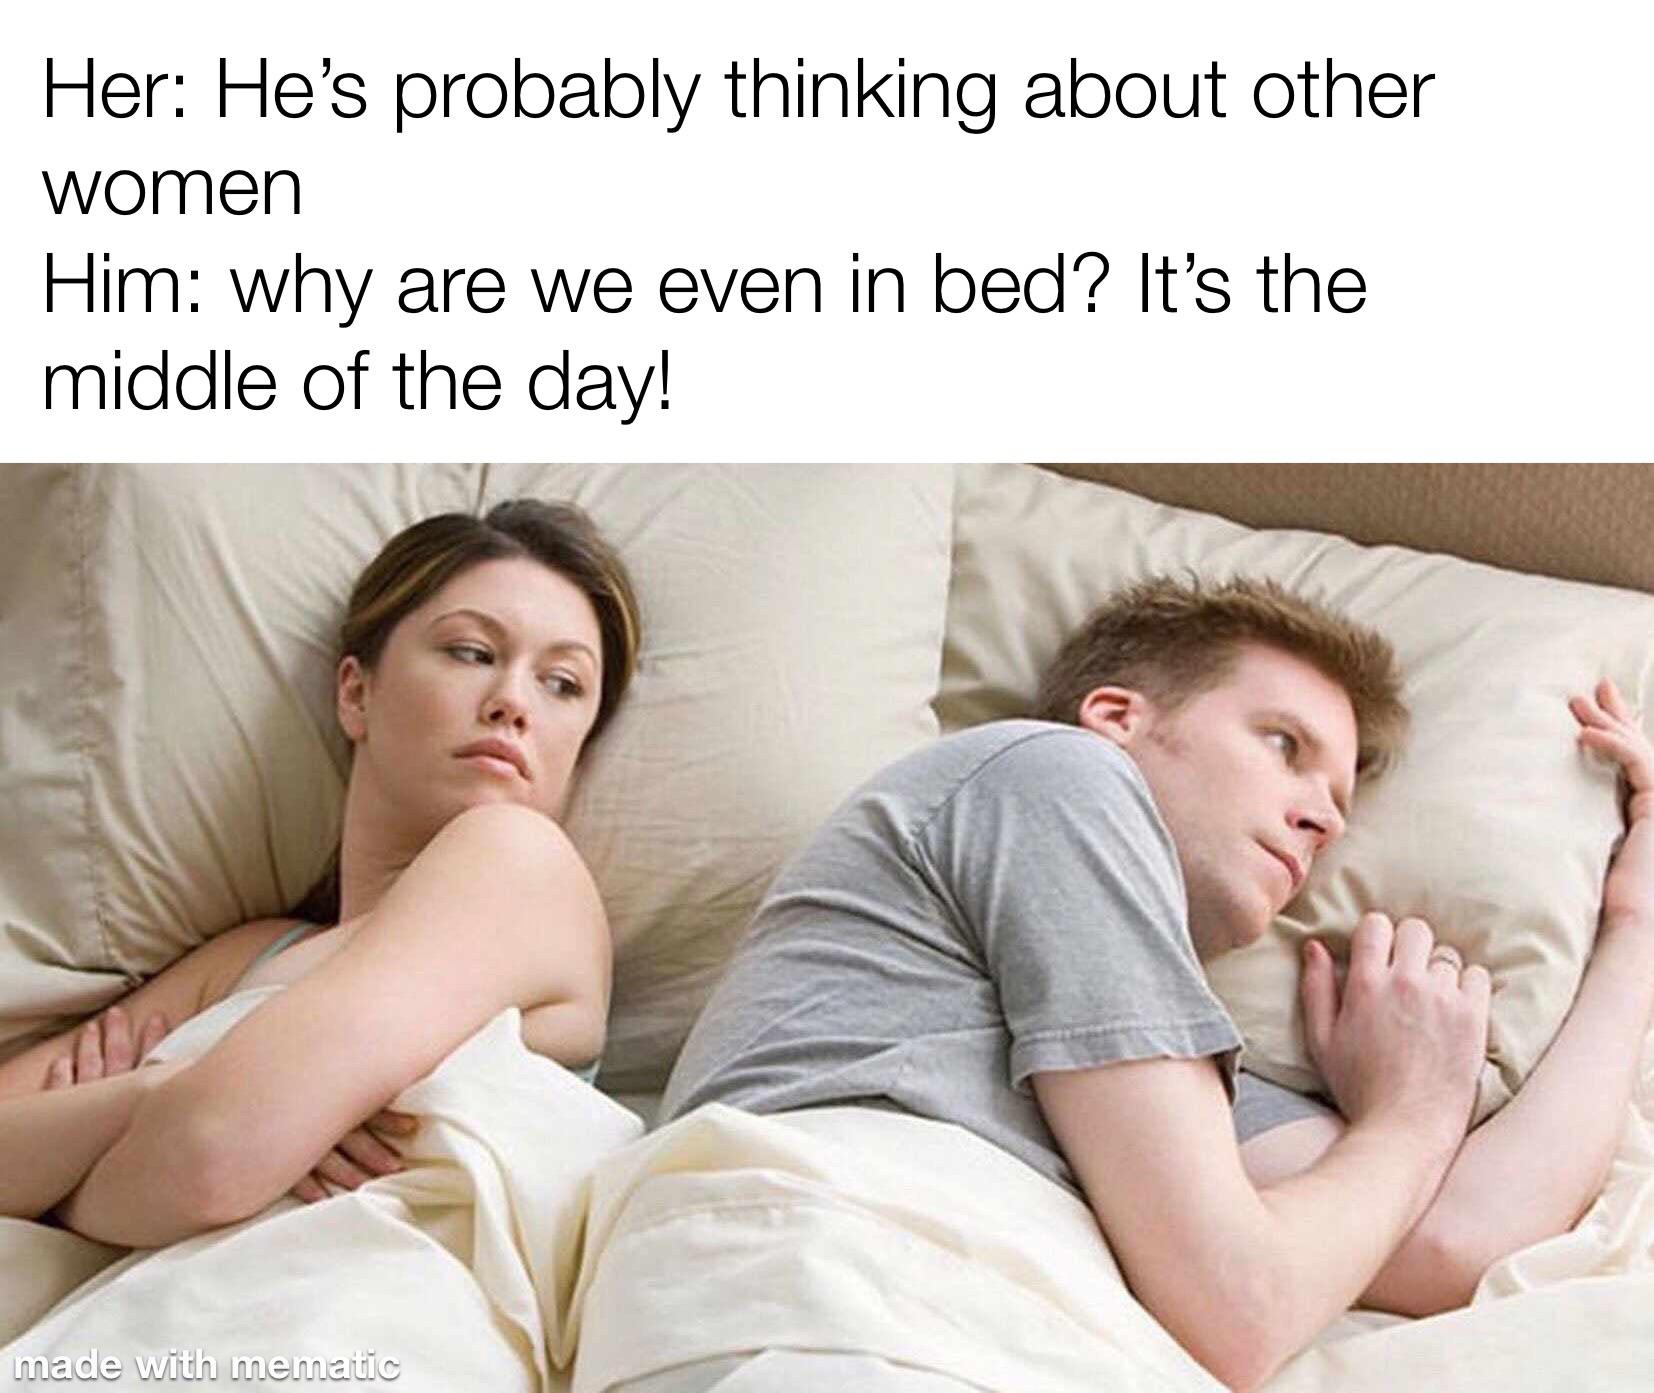 dank memes - bet he's thinking about other women meme - Her He's probably thinking about other women Him why are we even in bed? It's the middle of the day! made with mematic